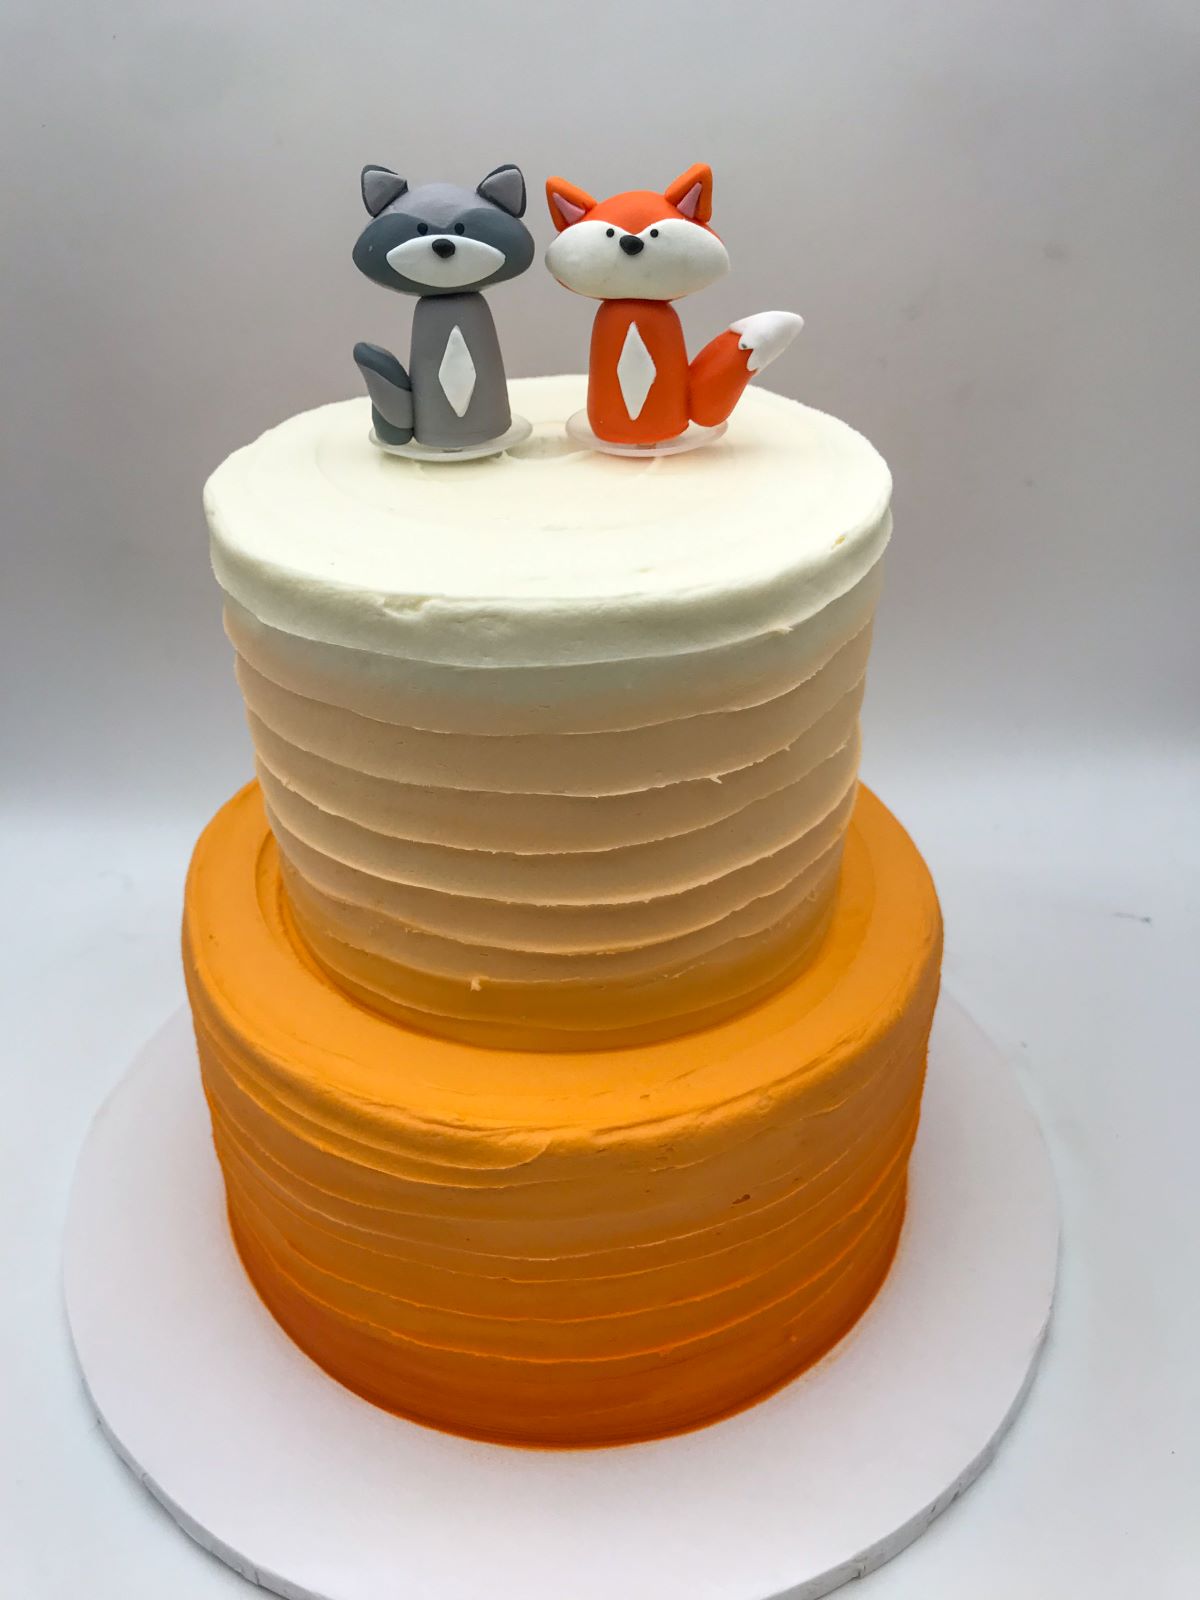 An orange ombre simple cake design with fox cake toppers.